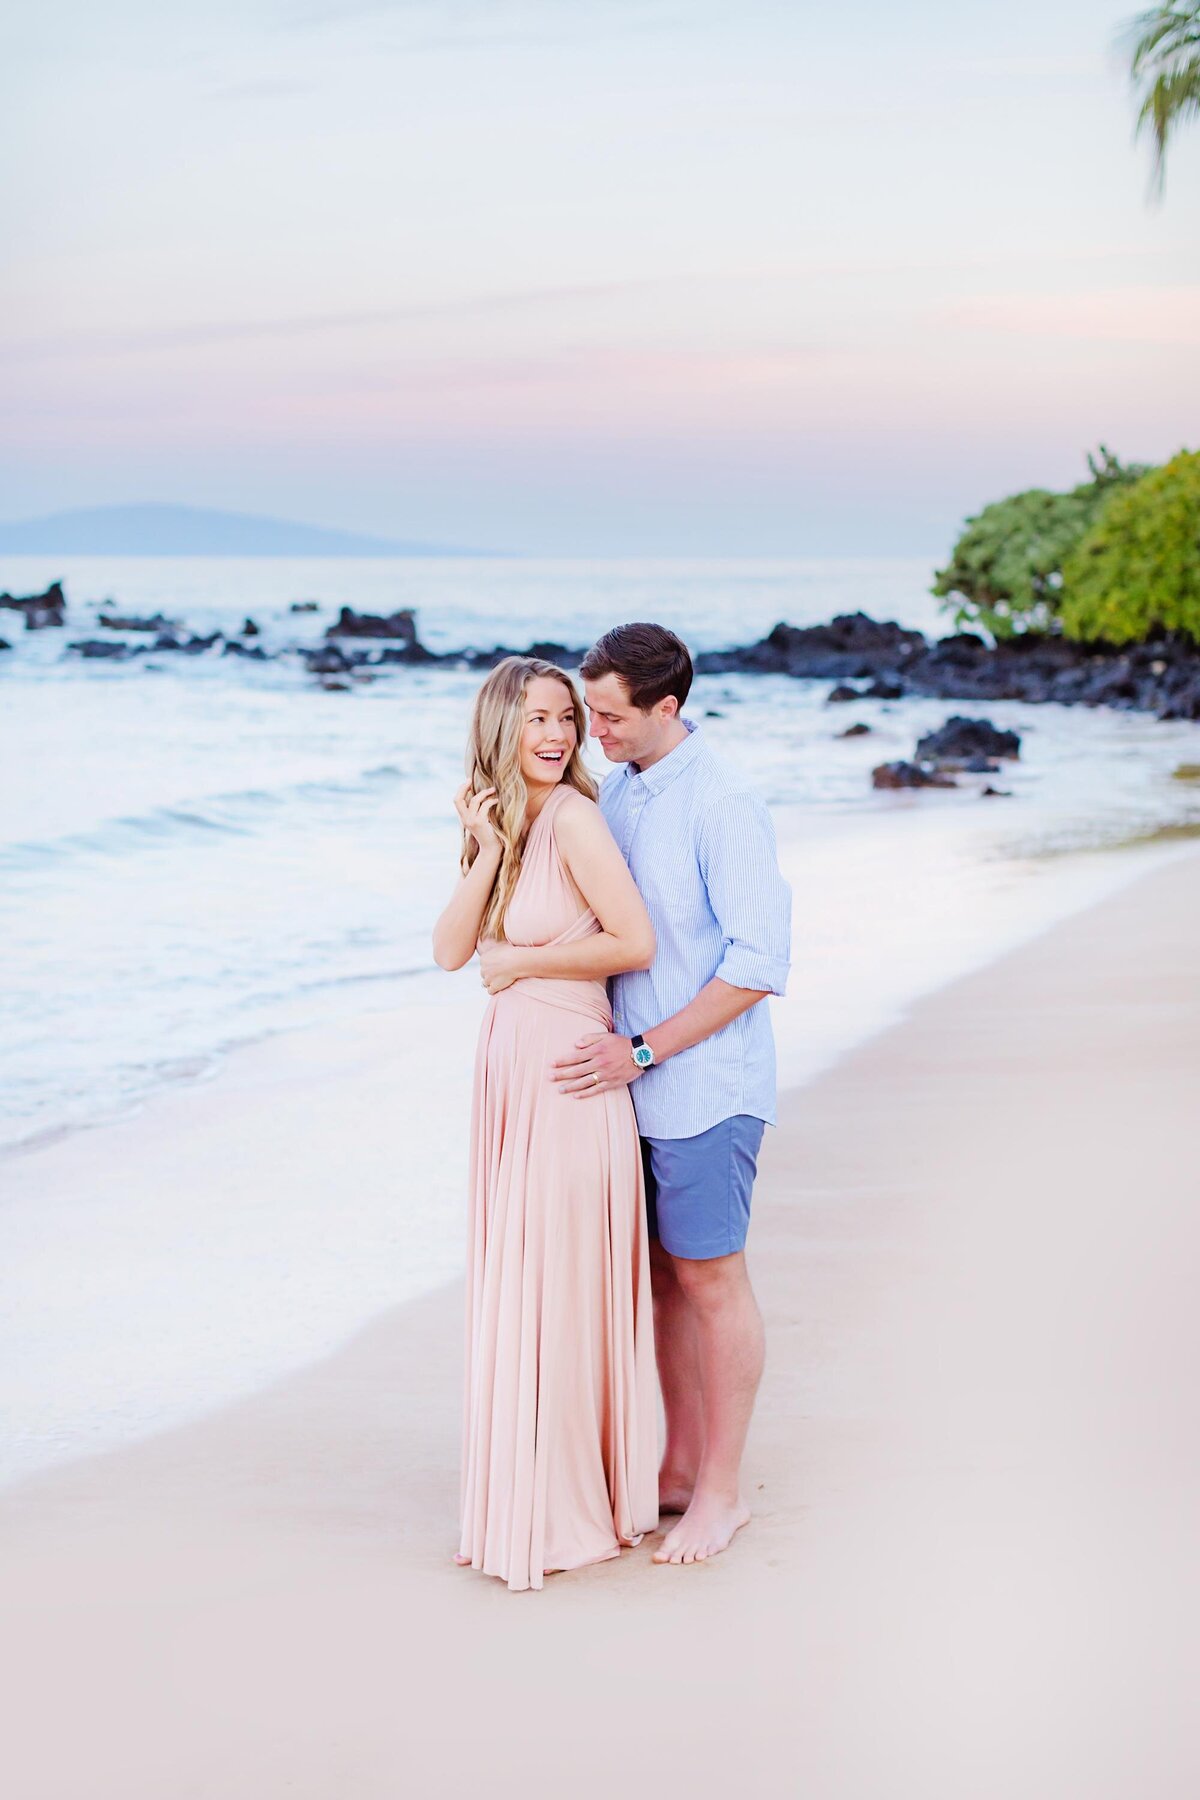 Olivia Jordan poses with her husband in Wailea during her babymoon on Maui with portraits photographed by Love + Water